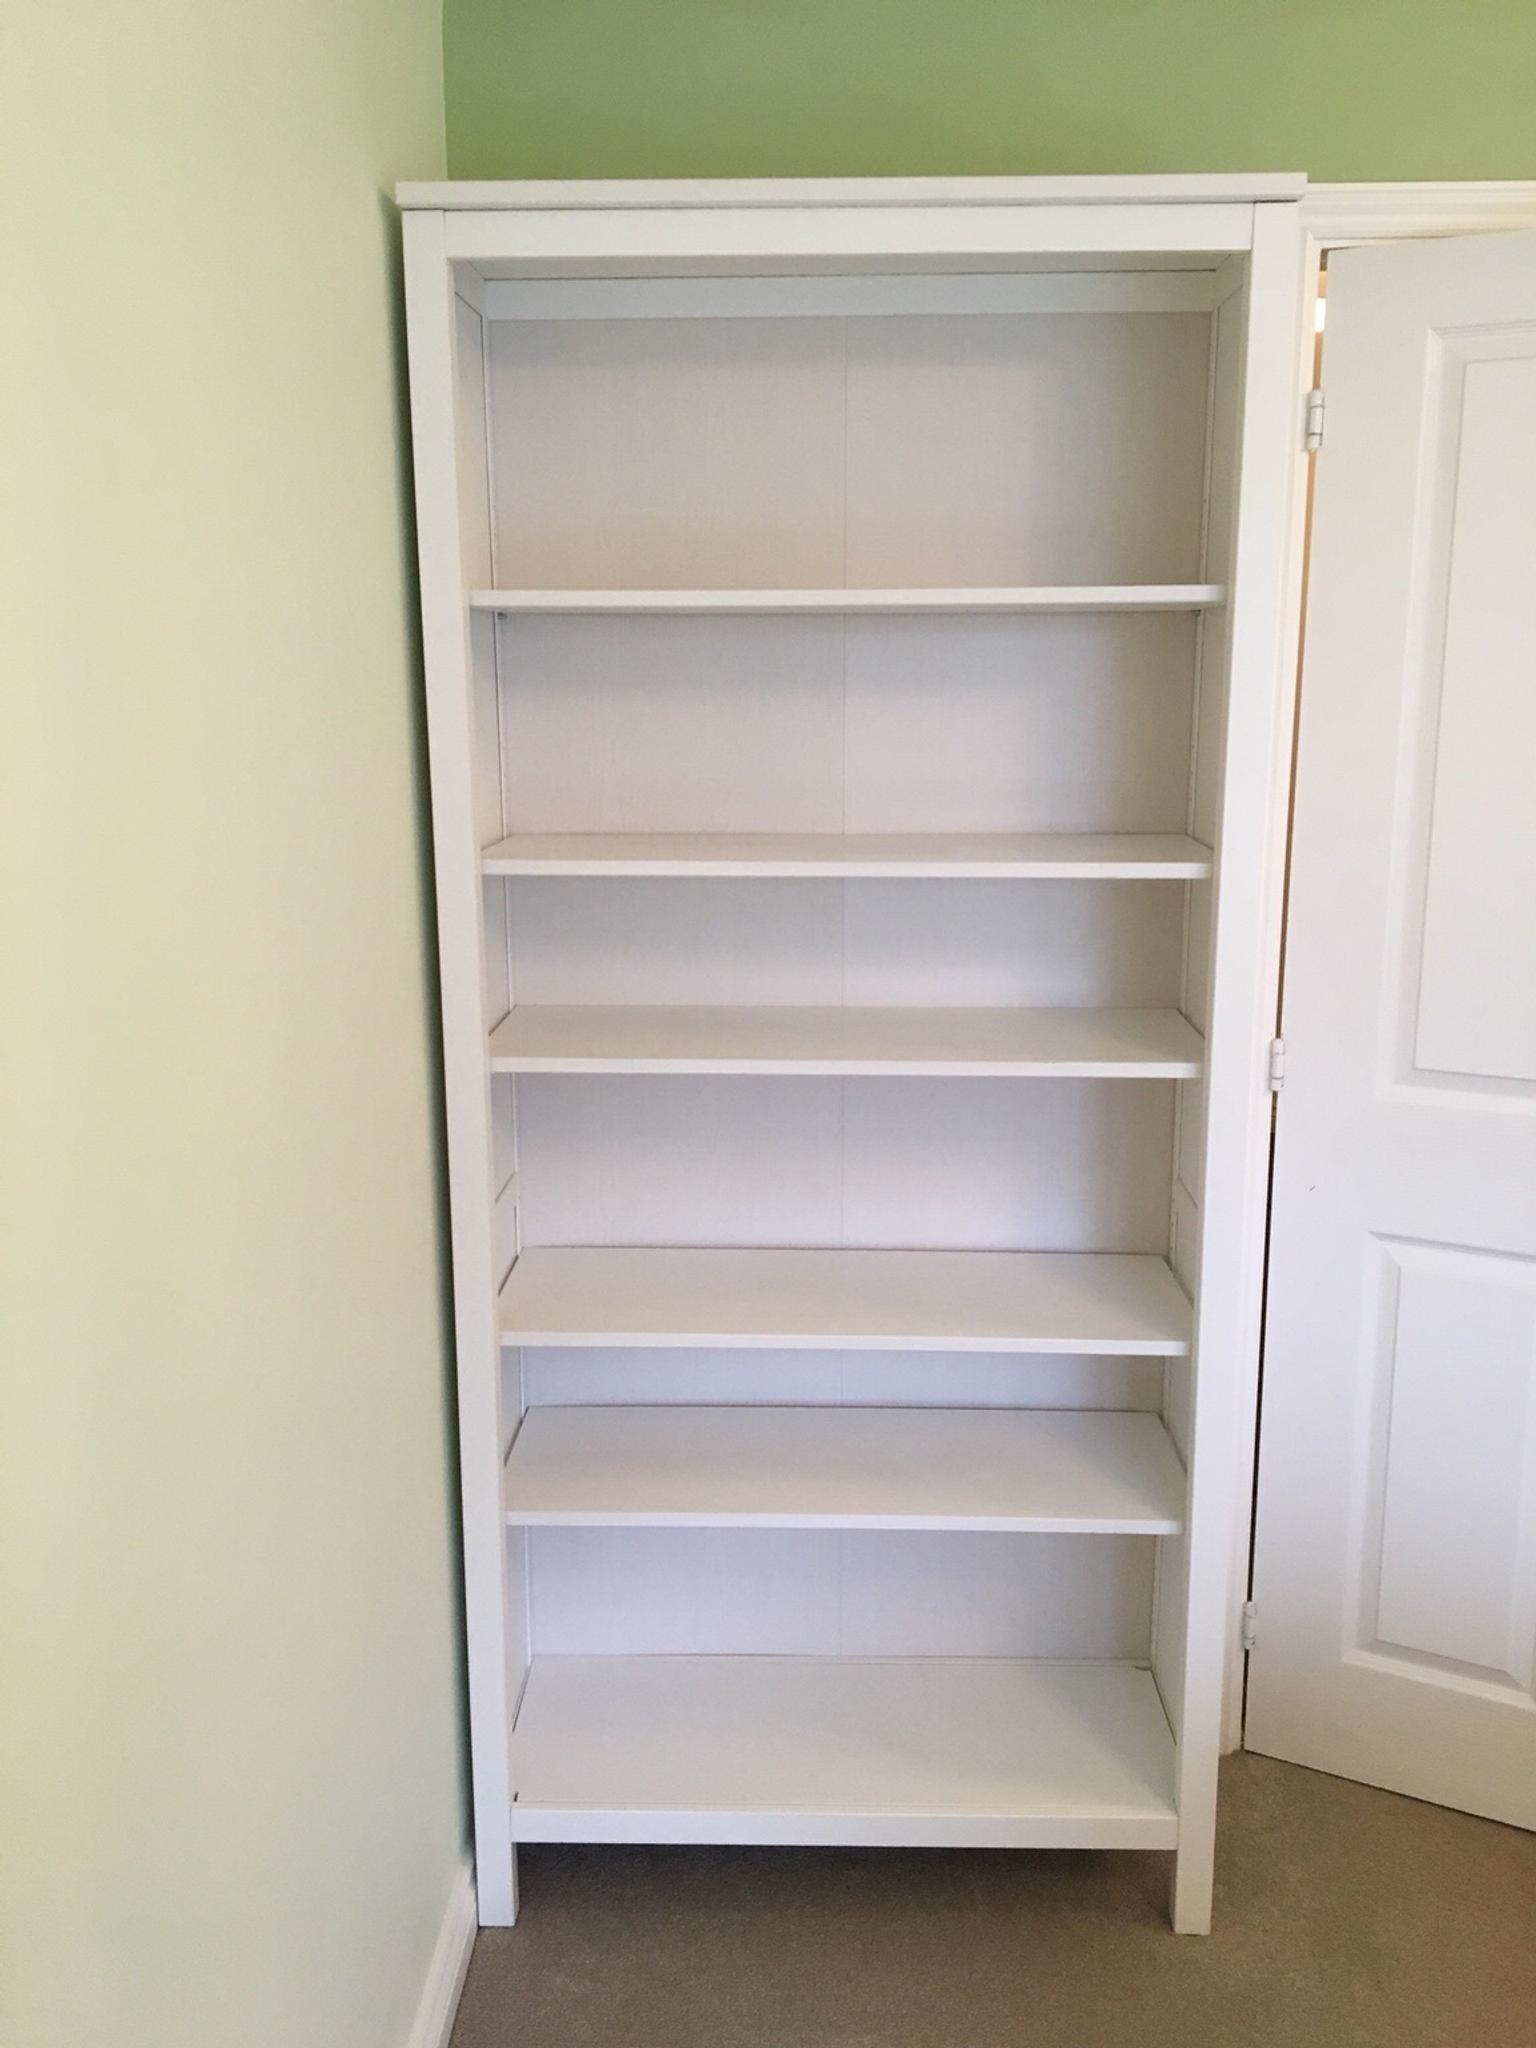 Ikea Hemnes Bookcase In Nn17 Corby For 20 00 For Sale Shpock